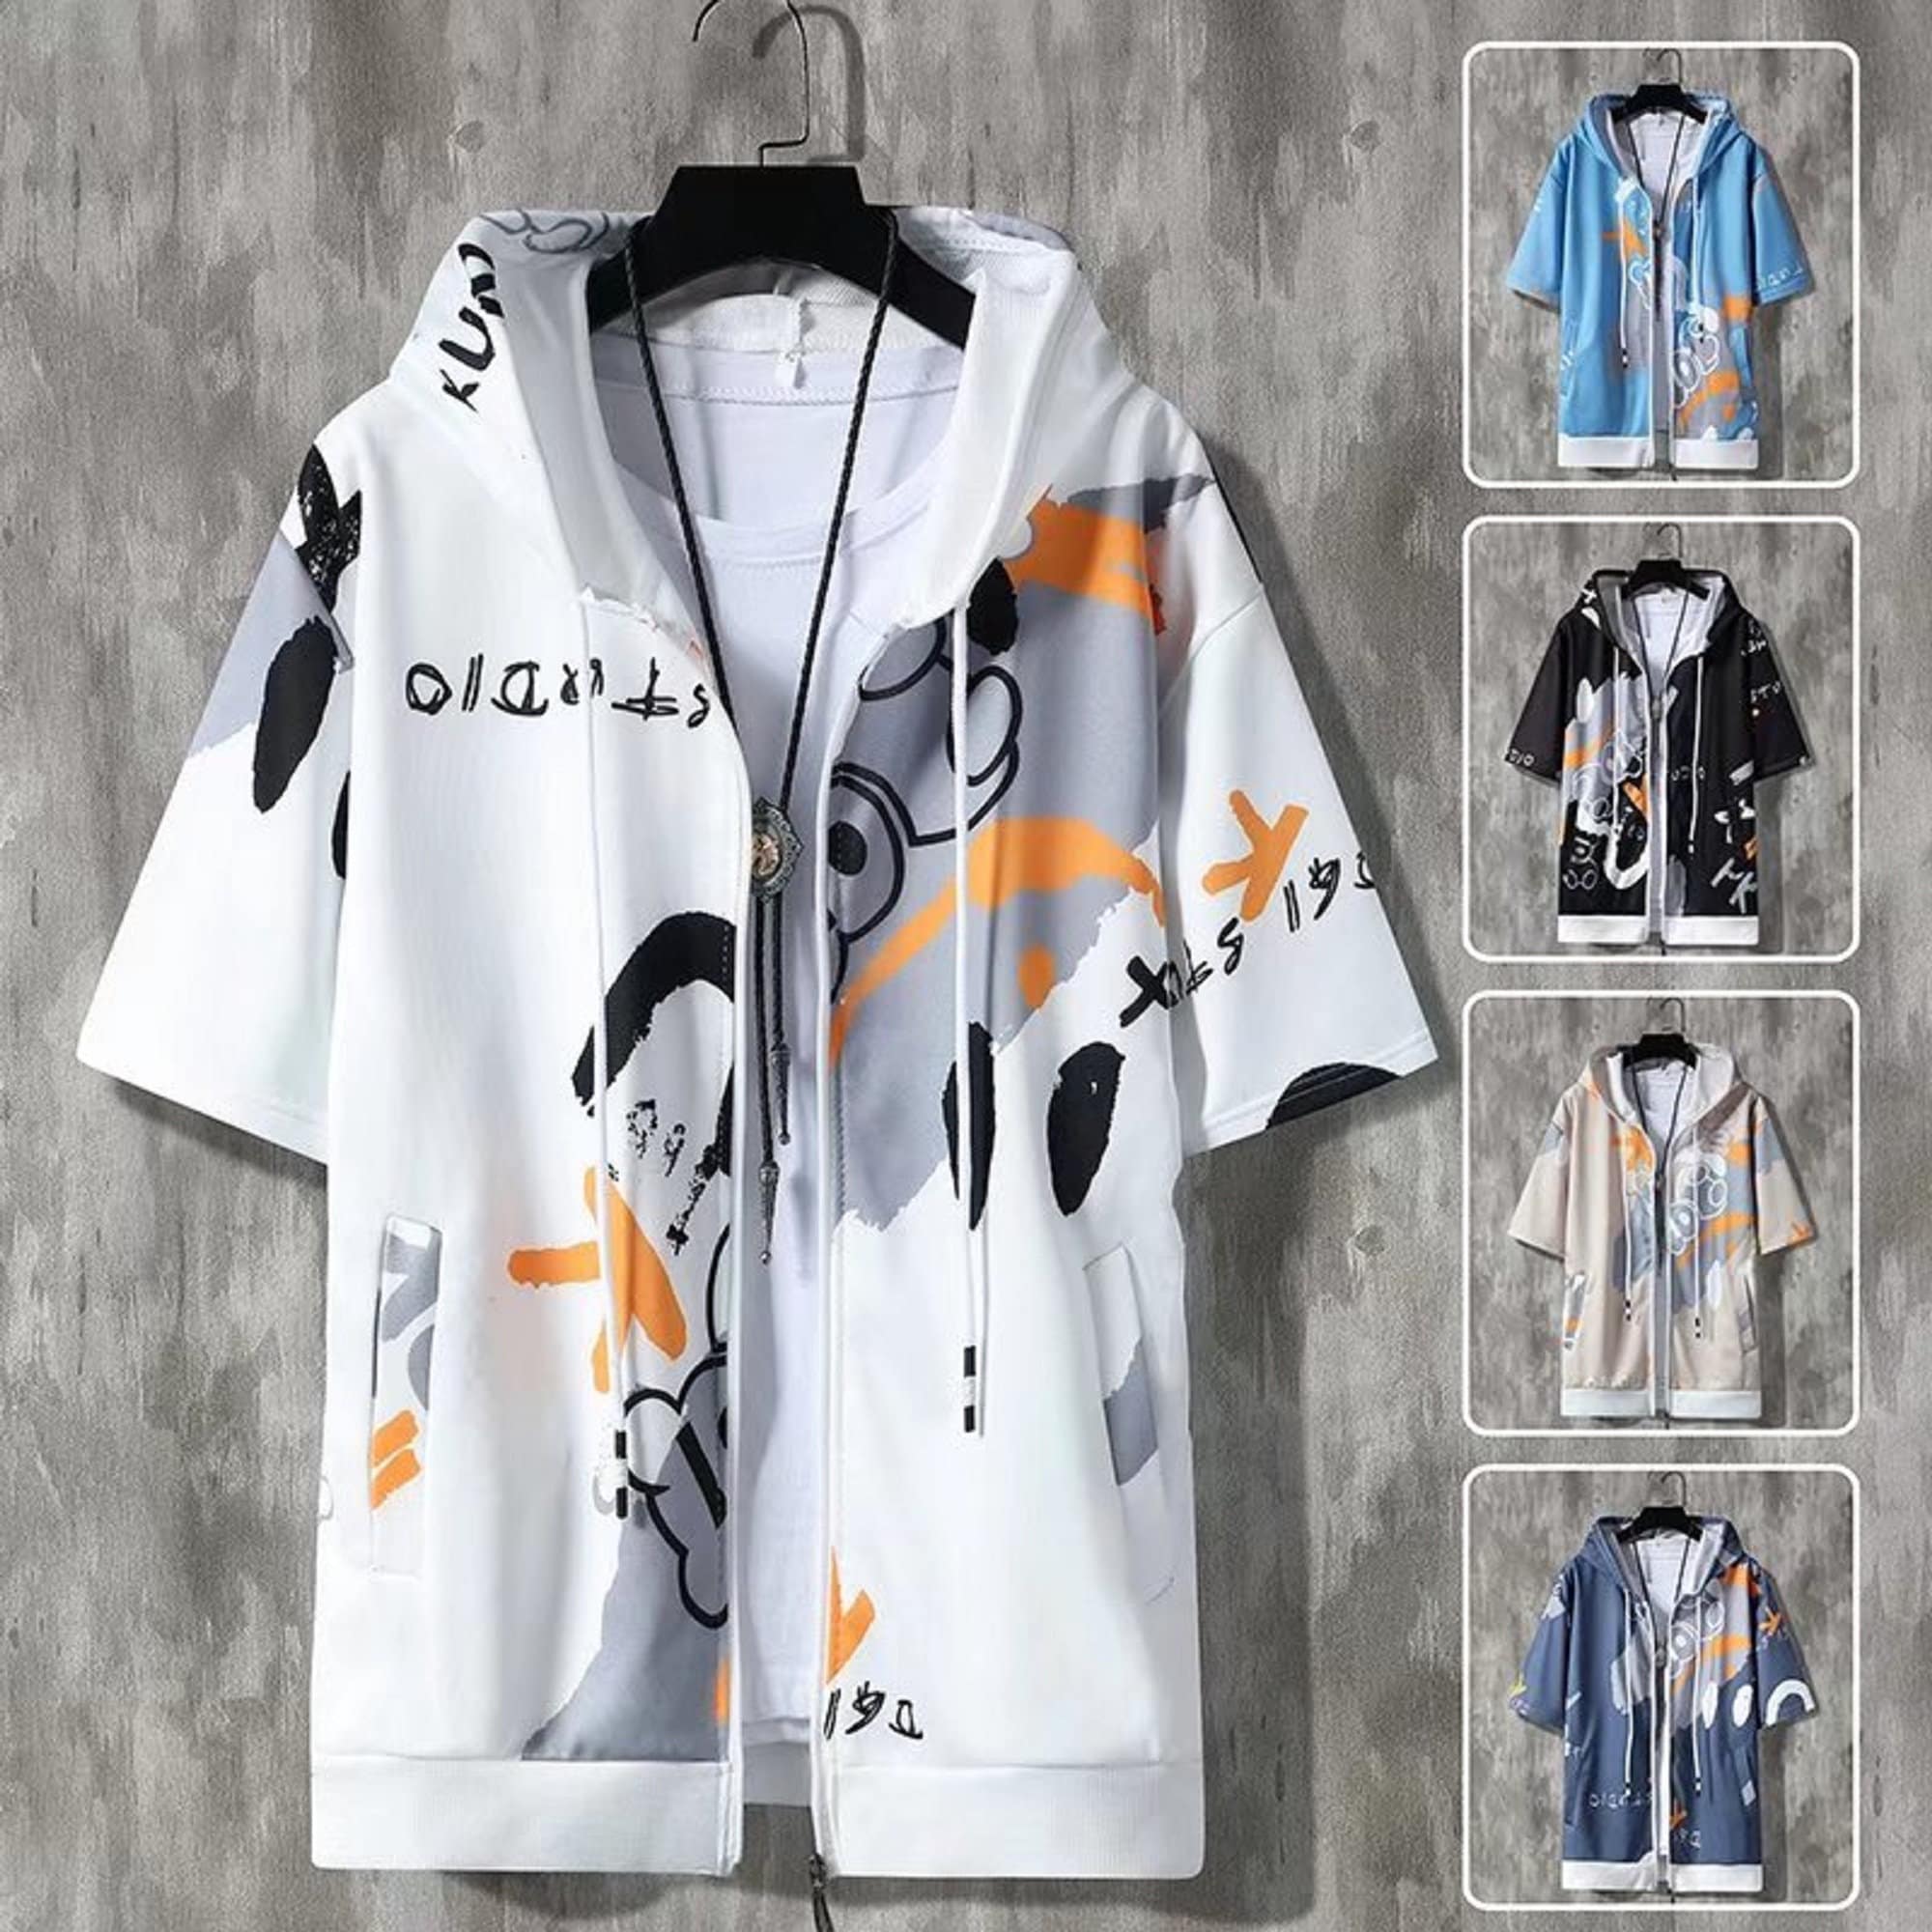 Cody Lundin Clothes for Men Anime 3D Sublimation T Shirt  China Beachwear  and One Piece price  MadeinChinacom